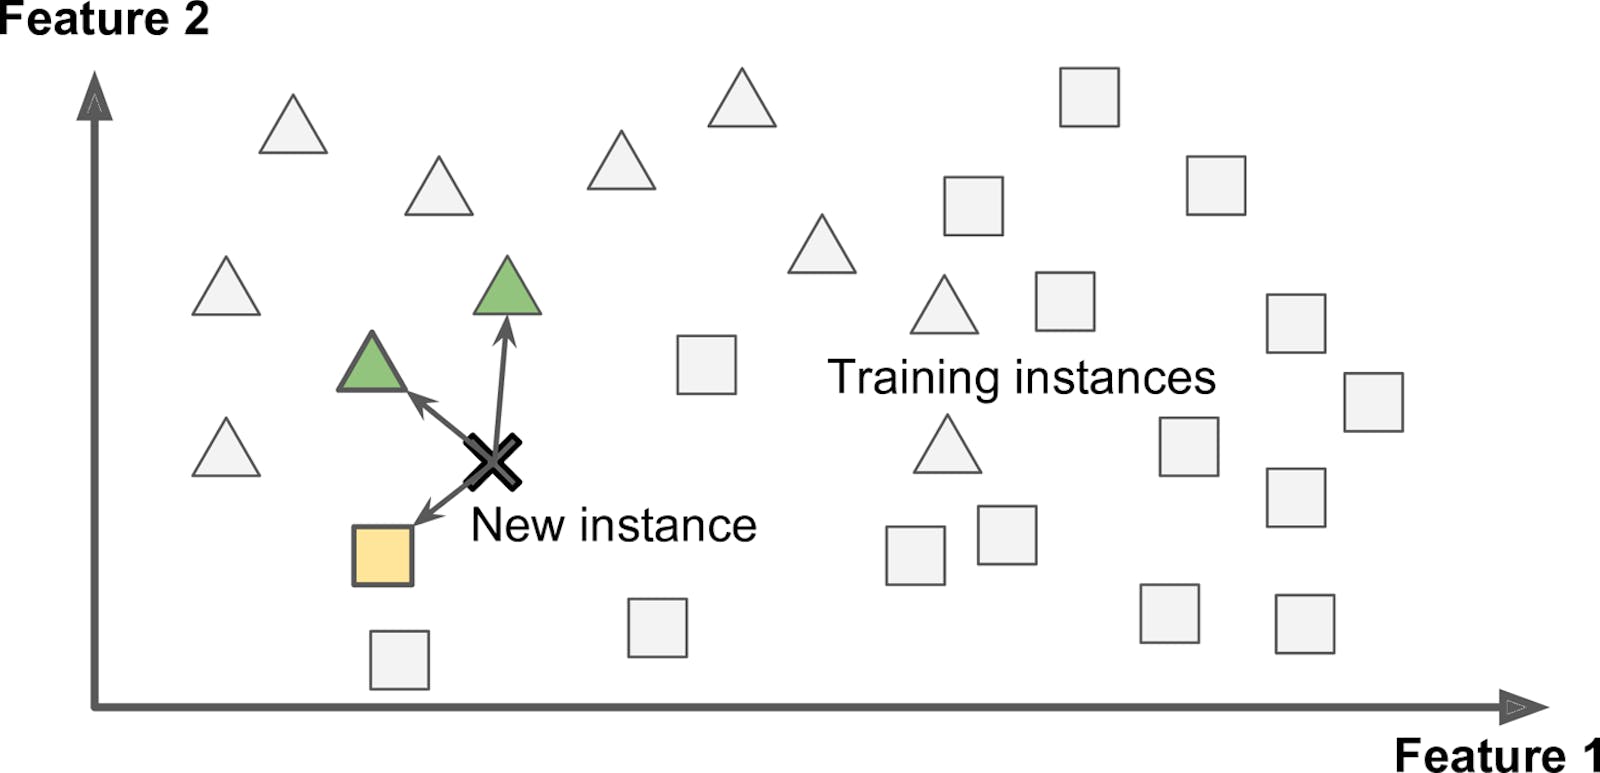 The Fundamentals of Machine Learning - Part 3